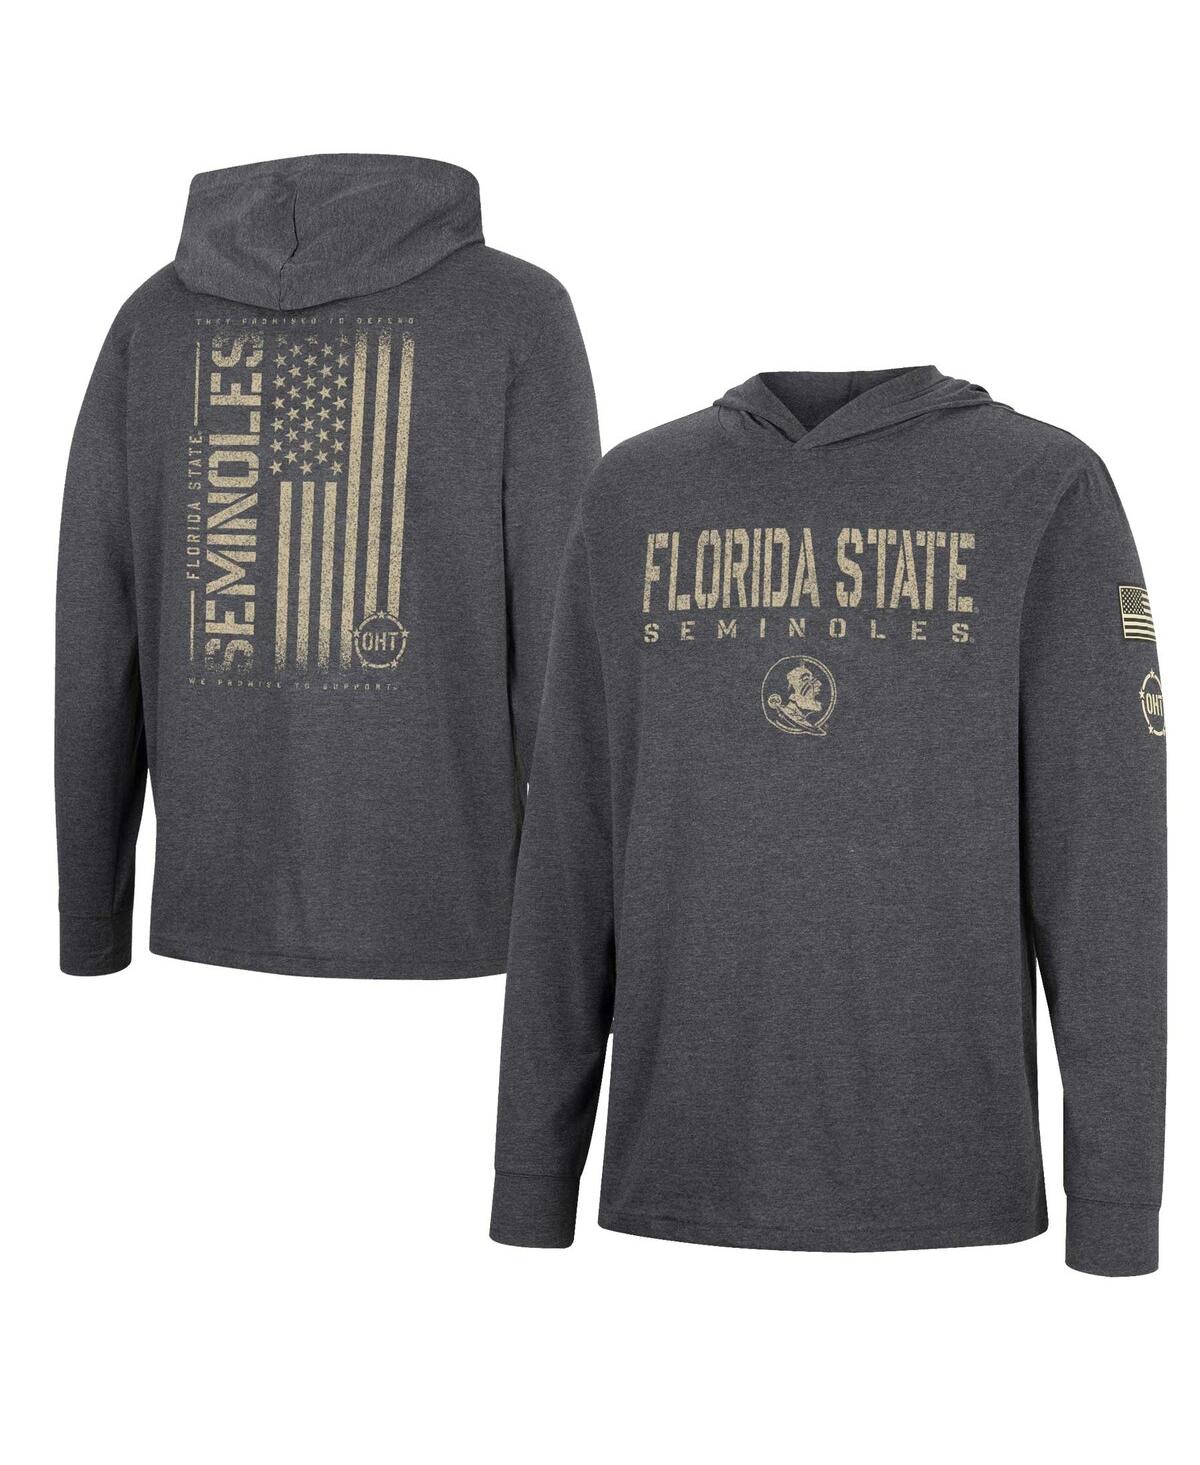 Colosseum Men's  Charcoal Florida State Seminoles Team Oht Military-inspired Appreciation Hoodie Long